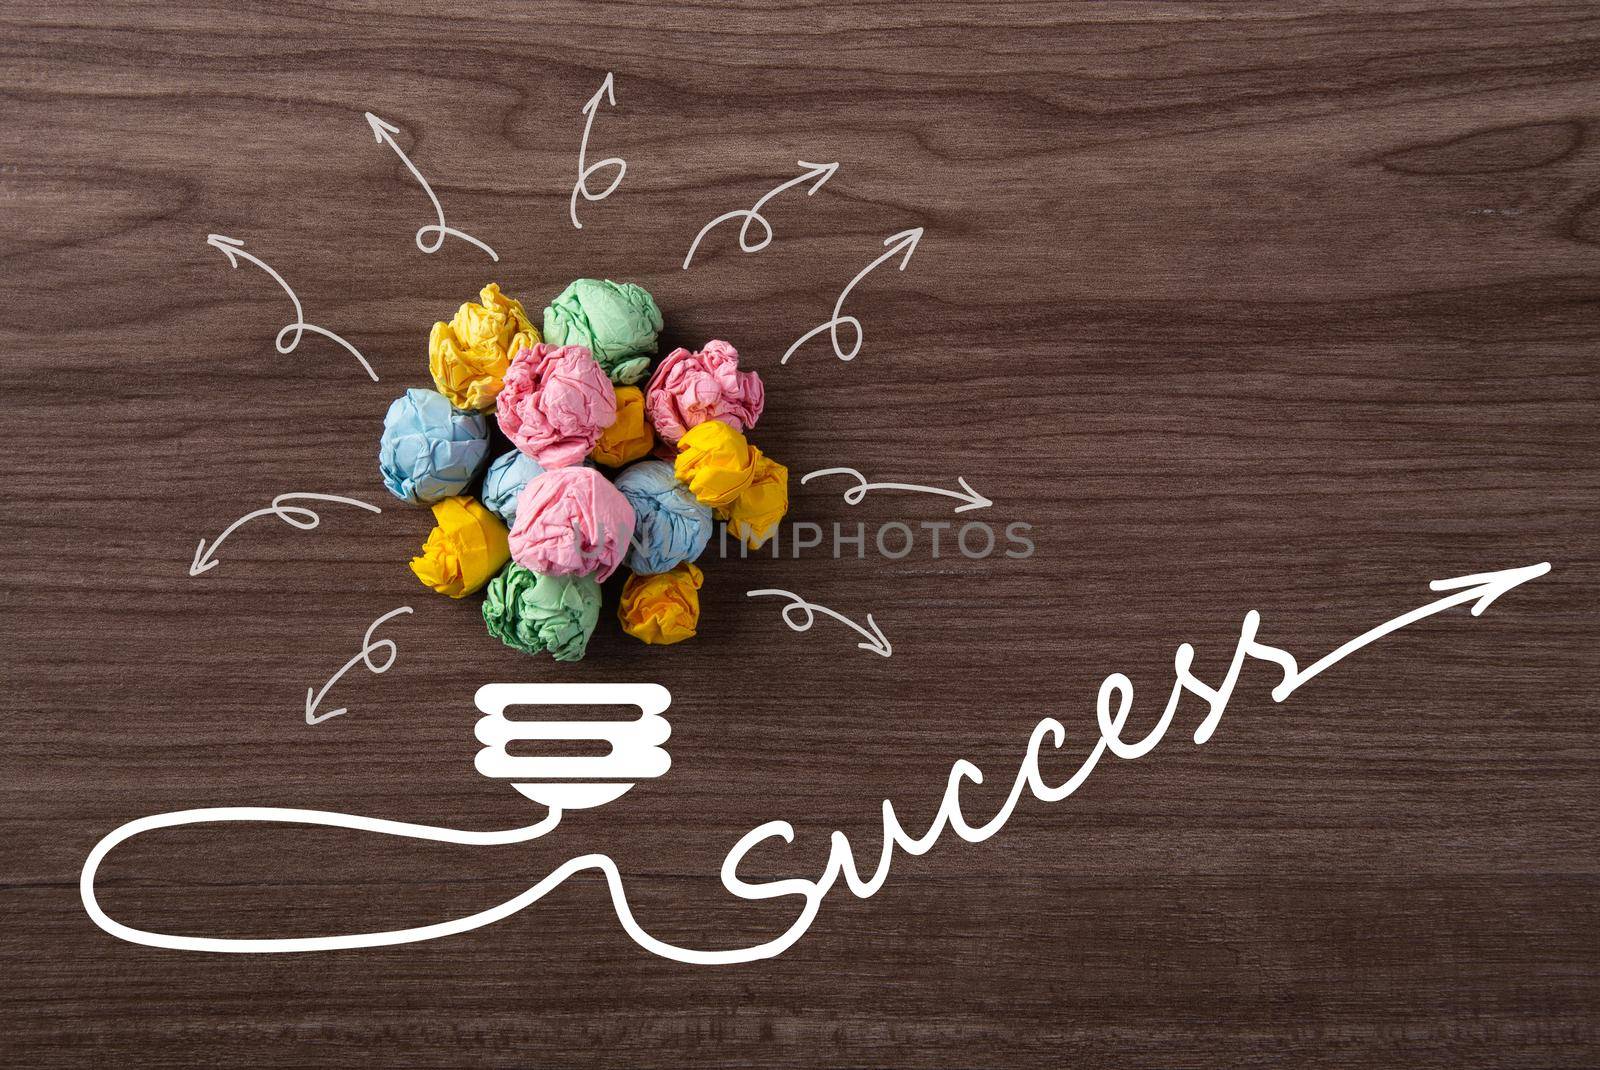 New good ideas, Paper Ball of lightbulb shape with success word on wooden background